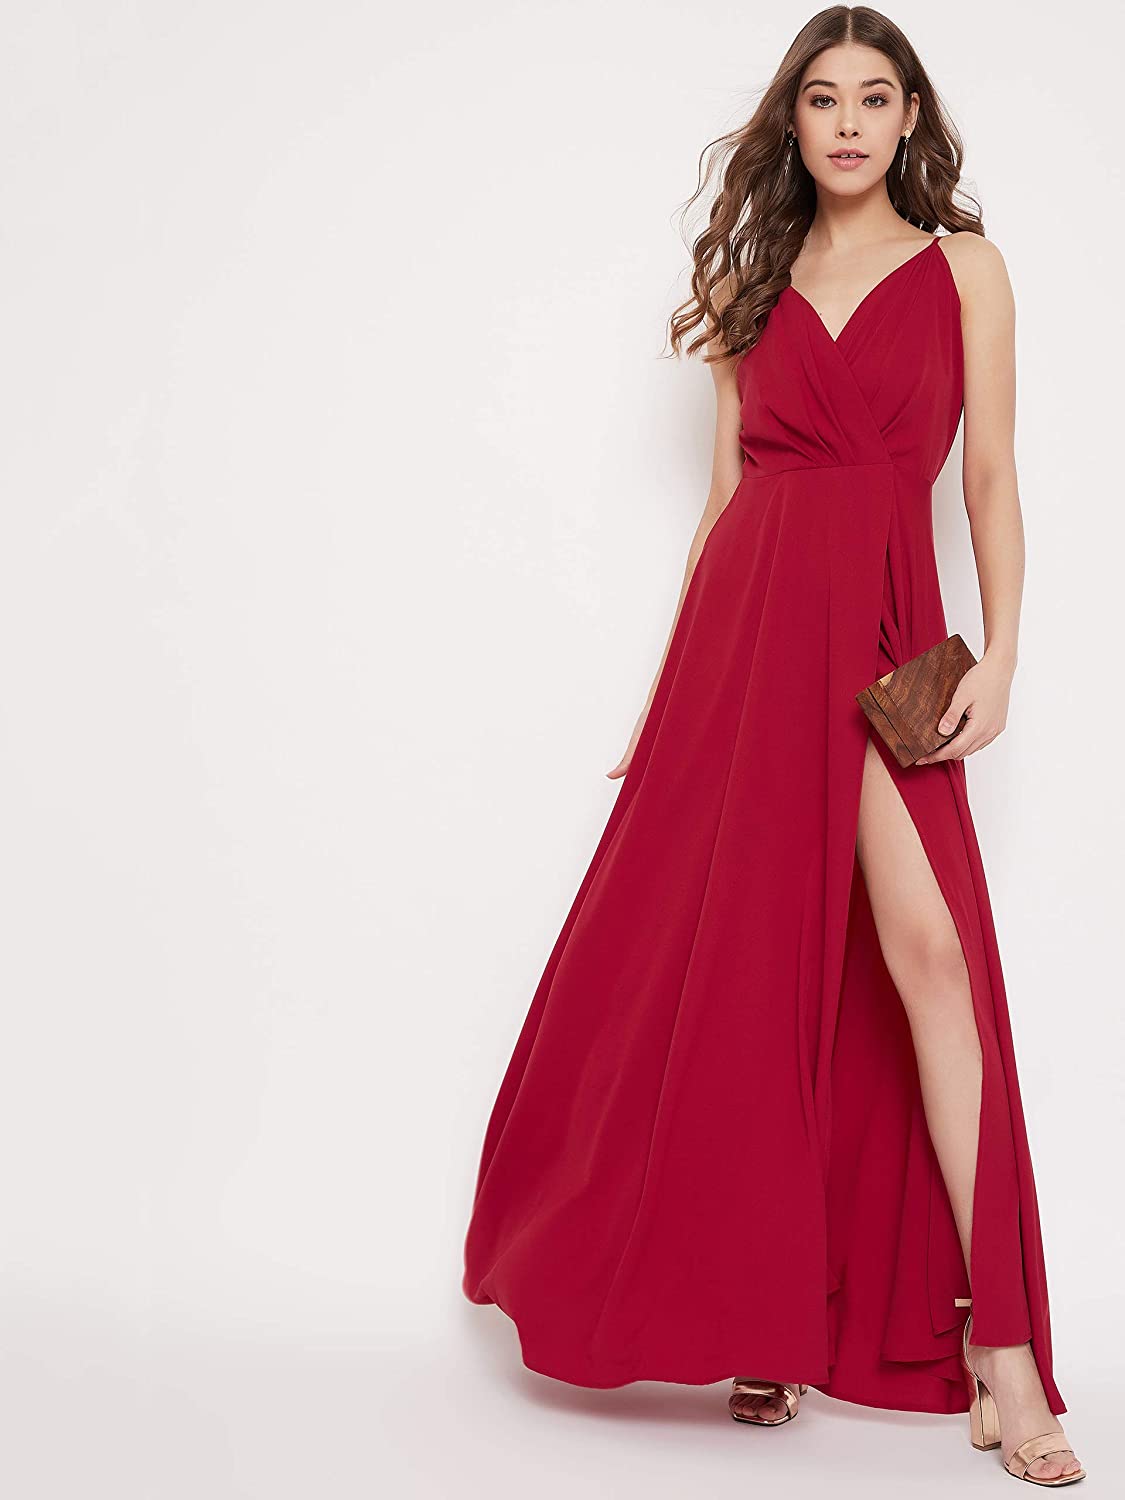 sexy dresses for women for night